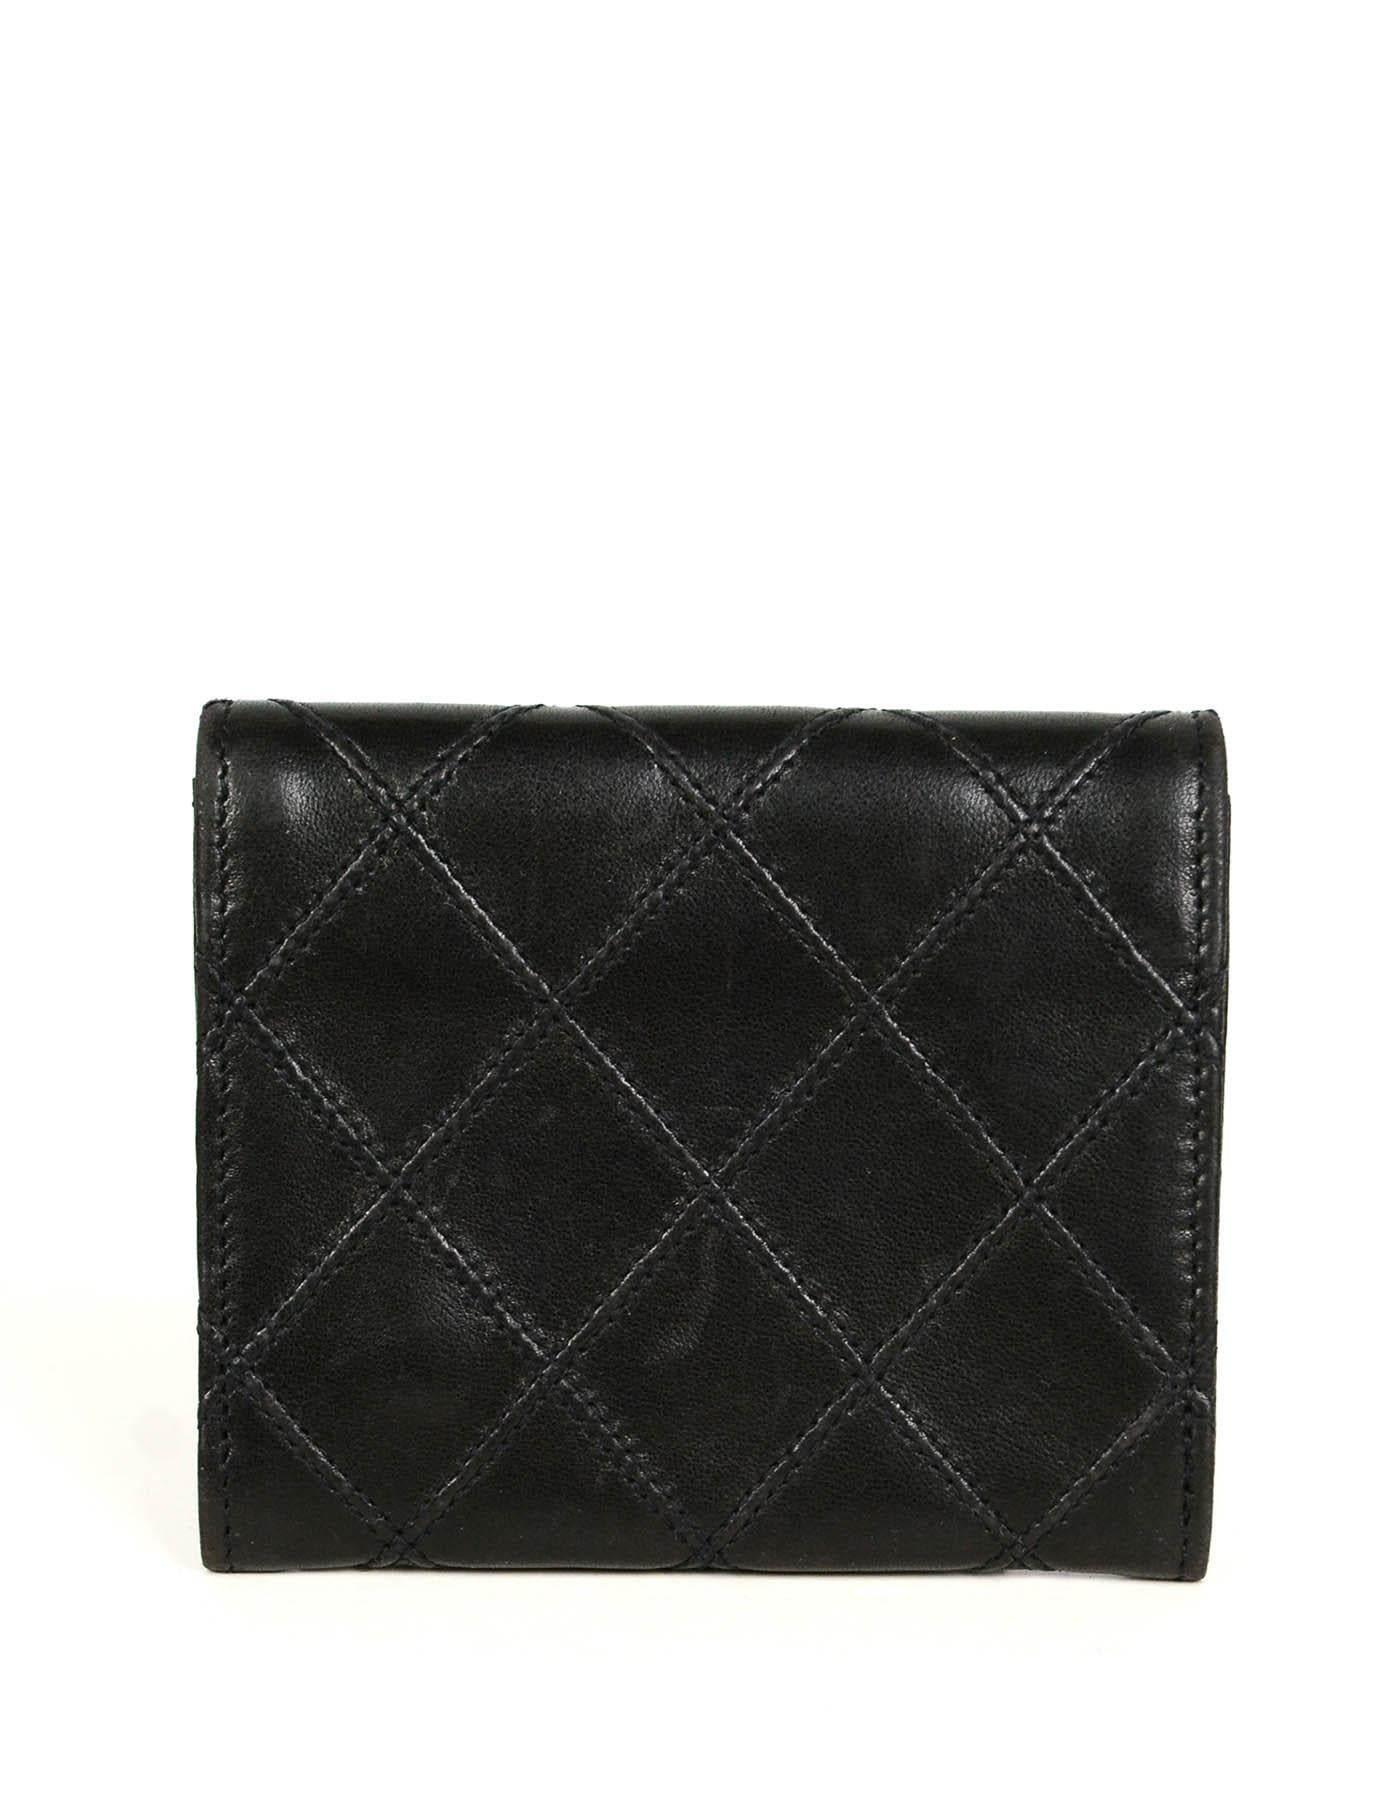 Chanel Black Lambskin Leather Quilted Card Case Wallet

Made In: France
Year of Production: 1994-1996
Color: Black
Hardware: Goldtone
Materials: Lambskin leather
Lining: Black grosgrain
Closure/Opening:  Flap top with snap
Exterior Pockets: